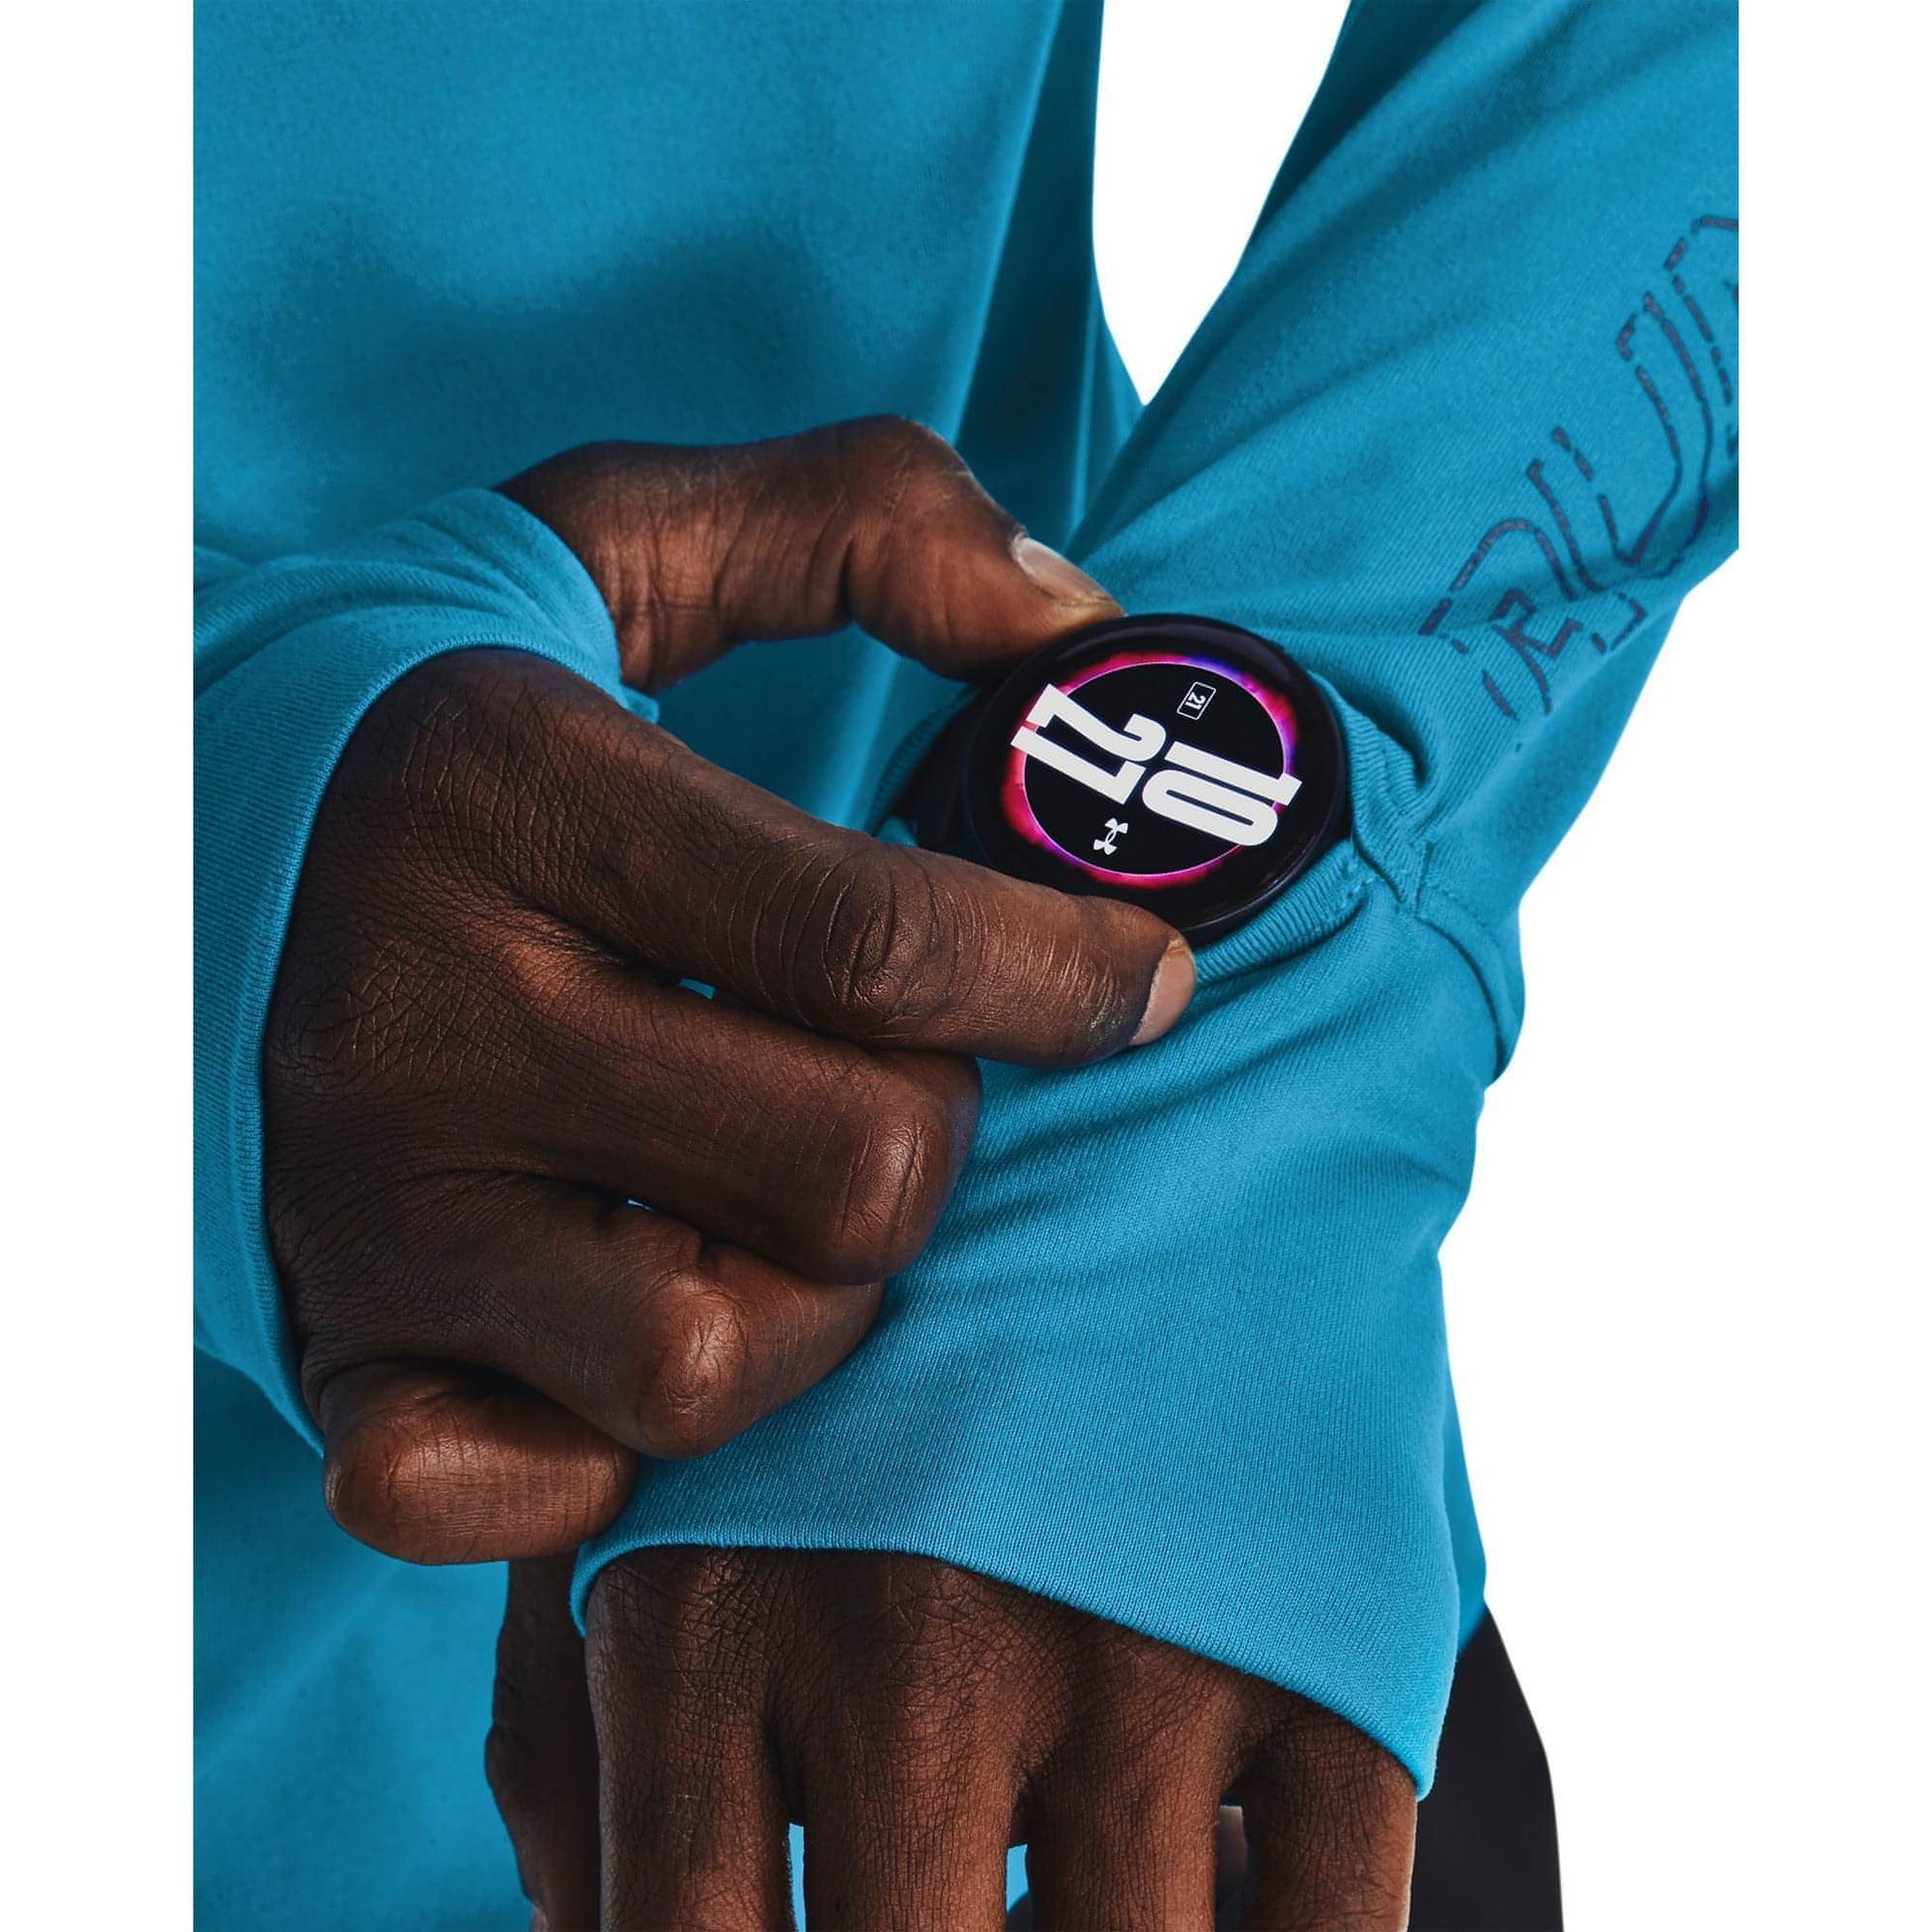 Under Armour Outrun The Cold Long Sleeve Details